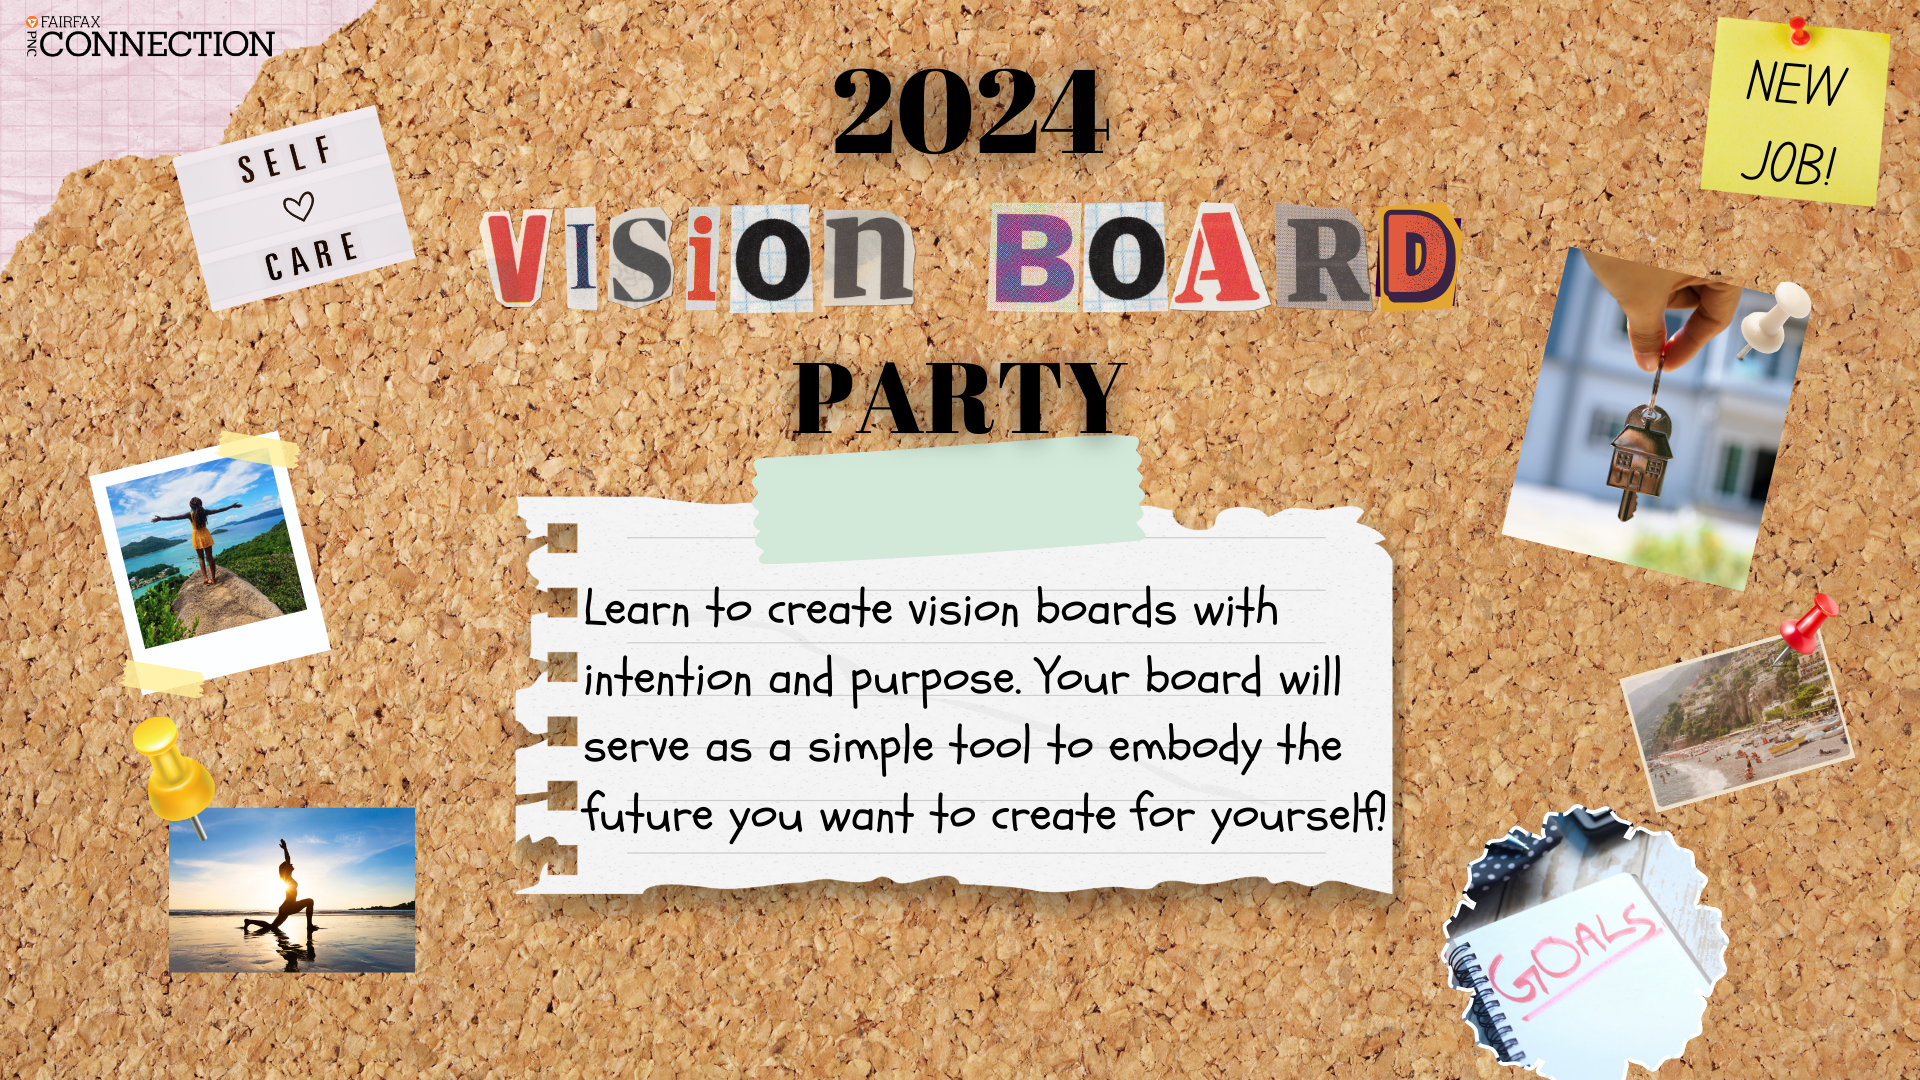 VISION BOARD PARTY Tickets, Sun, Jan 28, 2024 at 1:00 PM